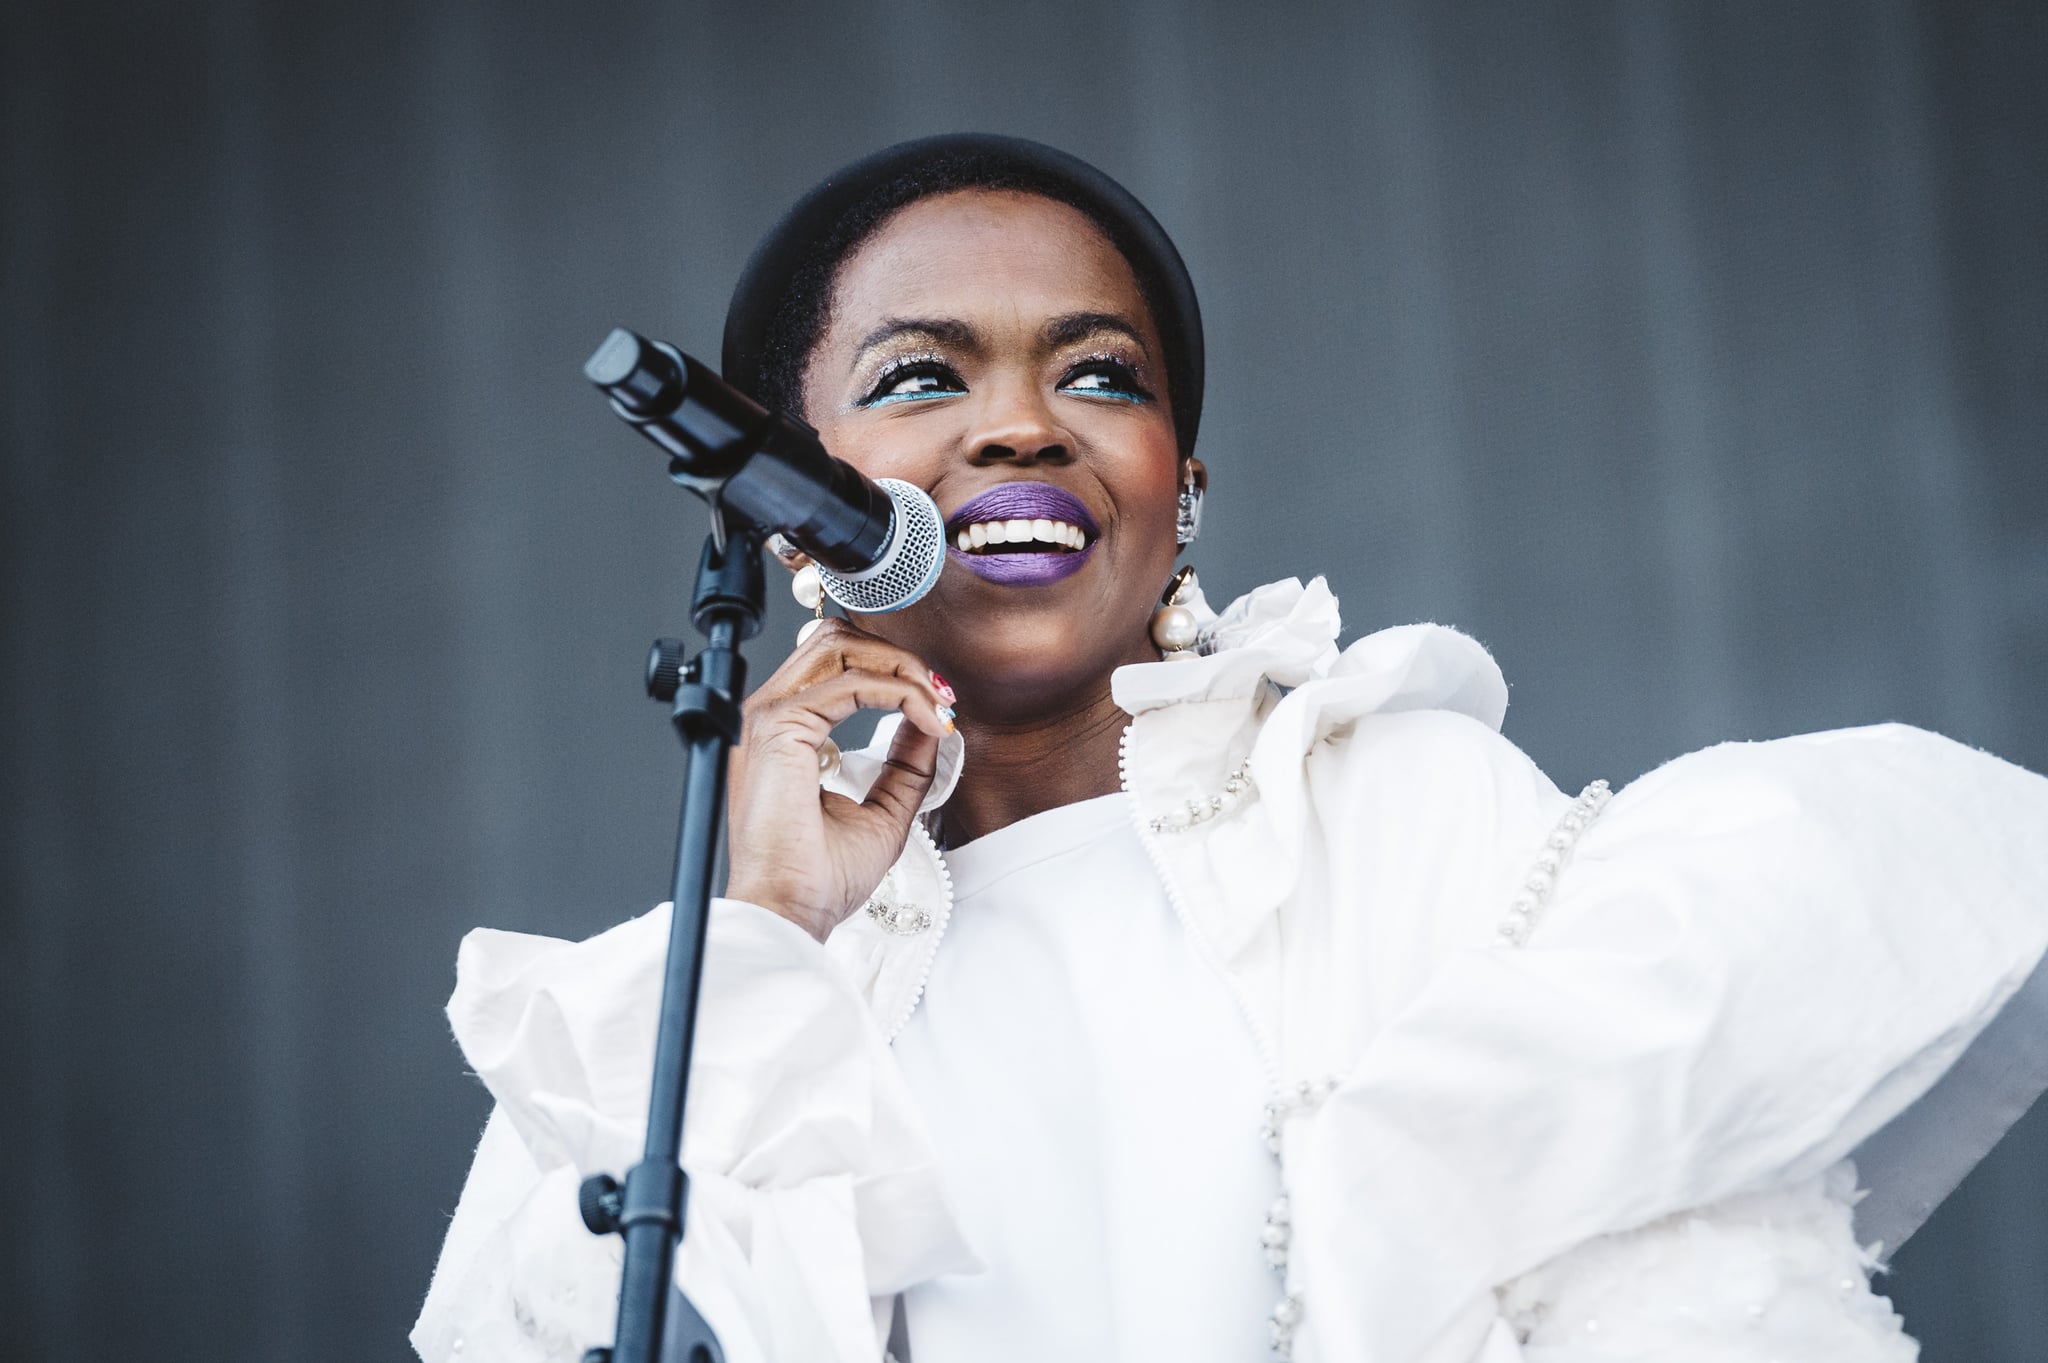 MADRID, SPAIN - JULY 11: Lauryn Hill performs on stage during day 1 of Madcool Festival on July 11, 2019 in Madrid, Spain. (Photo by Mariano Regidor/Redferns)